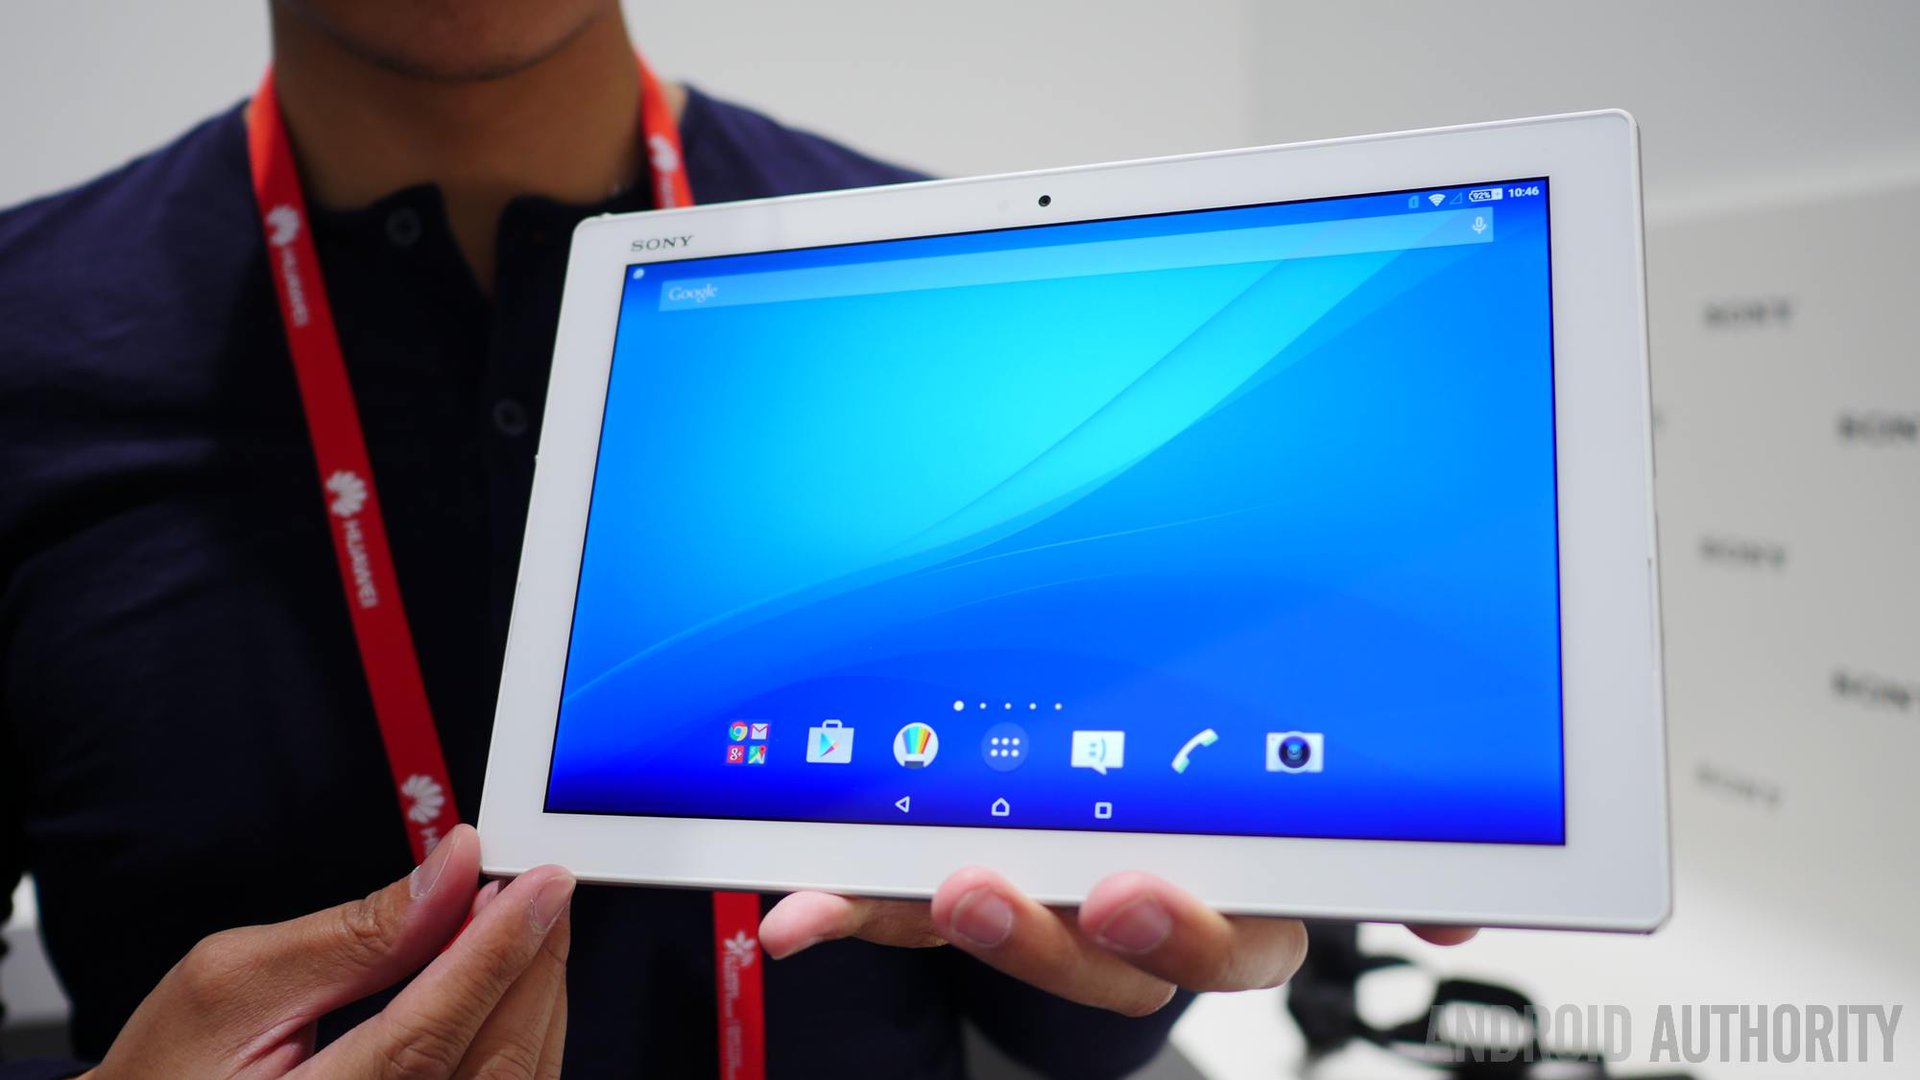 Sony Xperia Z4 Tablet First Look